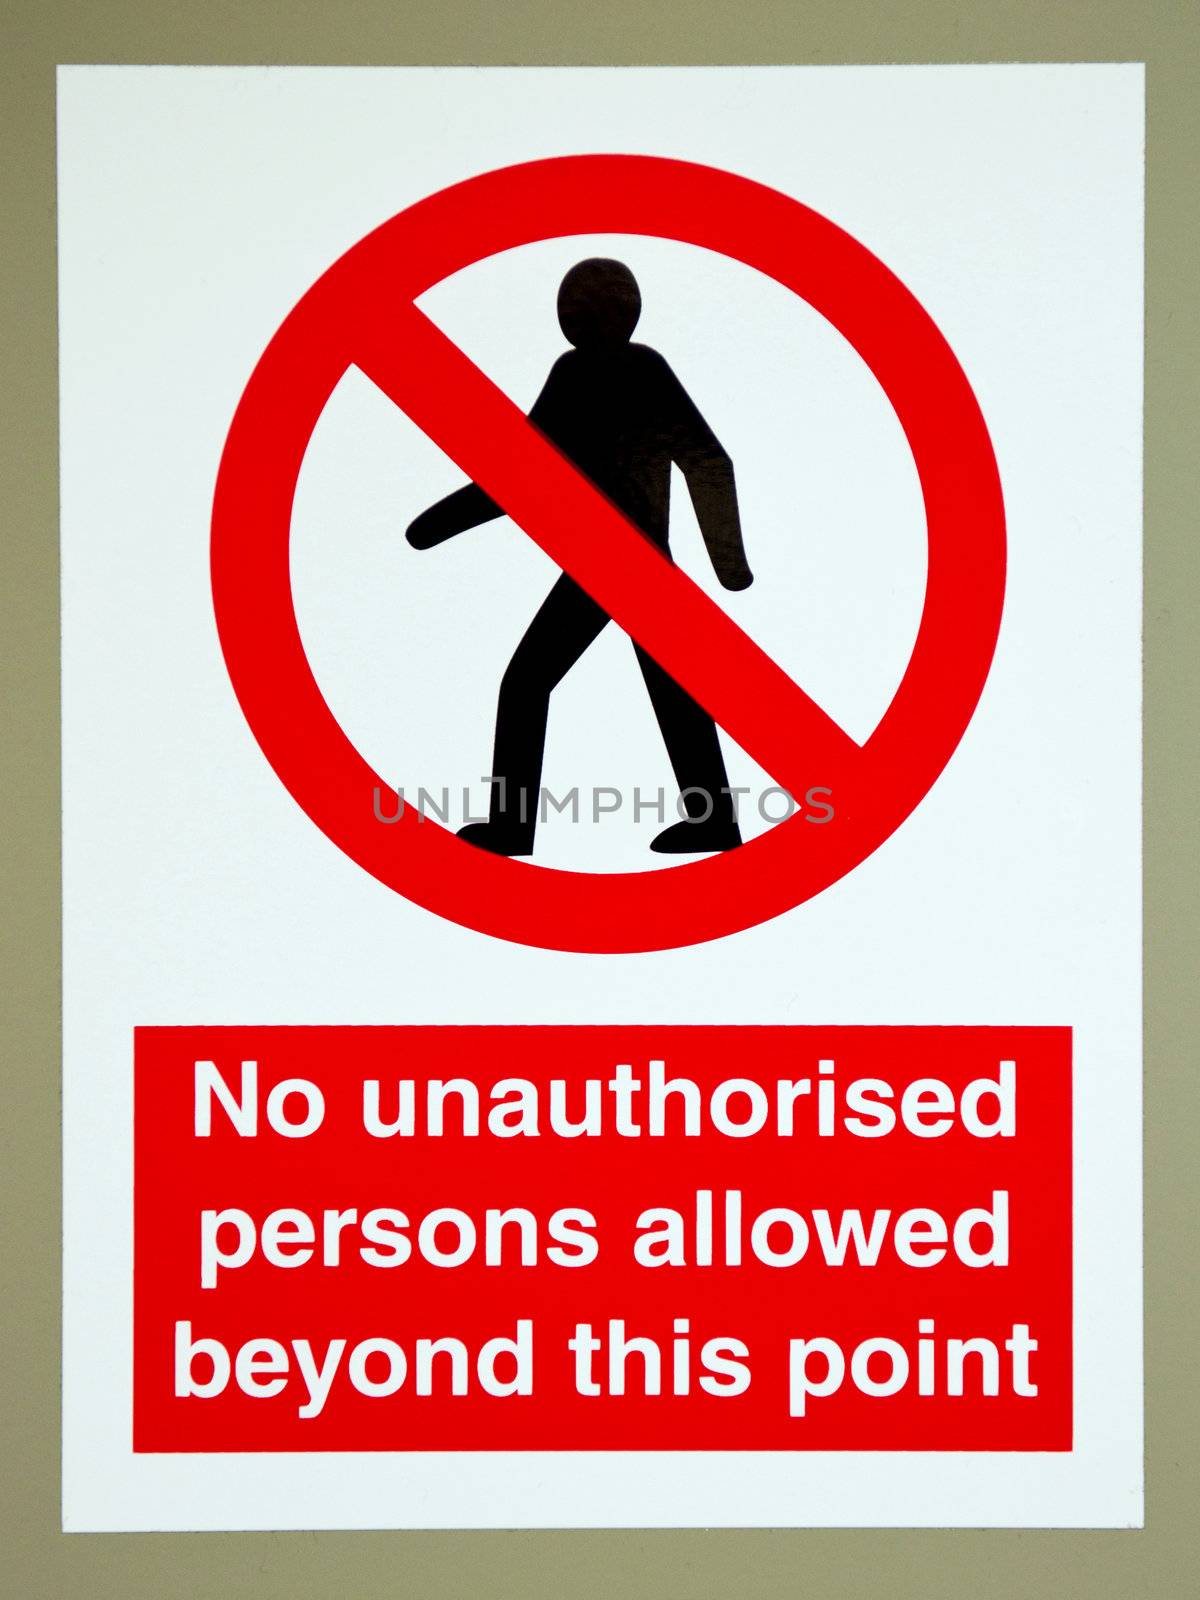 No unauthorised persons sign by luissantos84